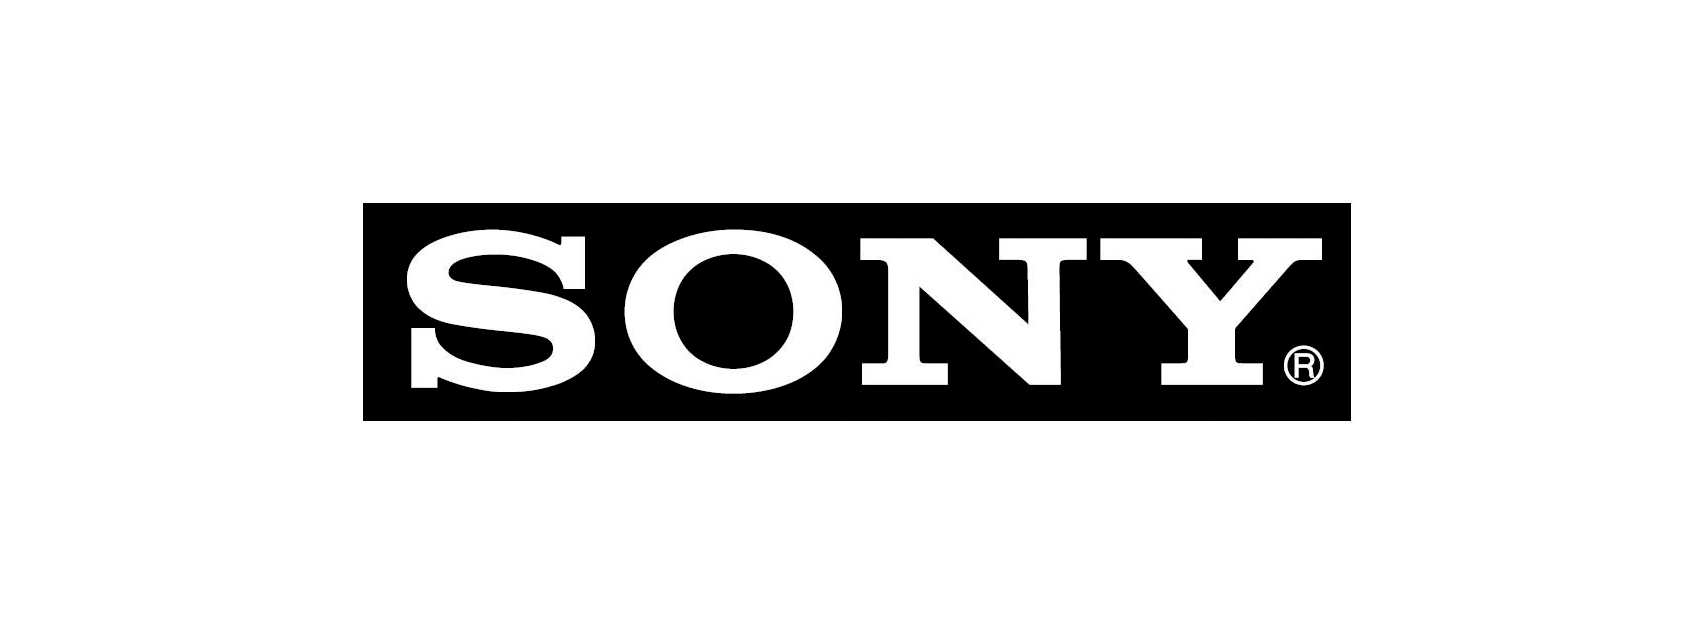 Sony Unknown Facts,Inspiring Facts about Sony, Interesting Facts 2019, Most Interesting Facts, startup stories, Surprising Facts About Sony, Sony Amazing Facts, Sony Facts, Sony Facts 2019, Sony History and Facts, Sony Lesser Known Facts, Sony Success Story